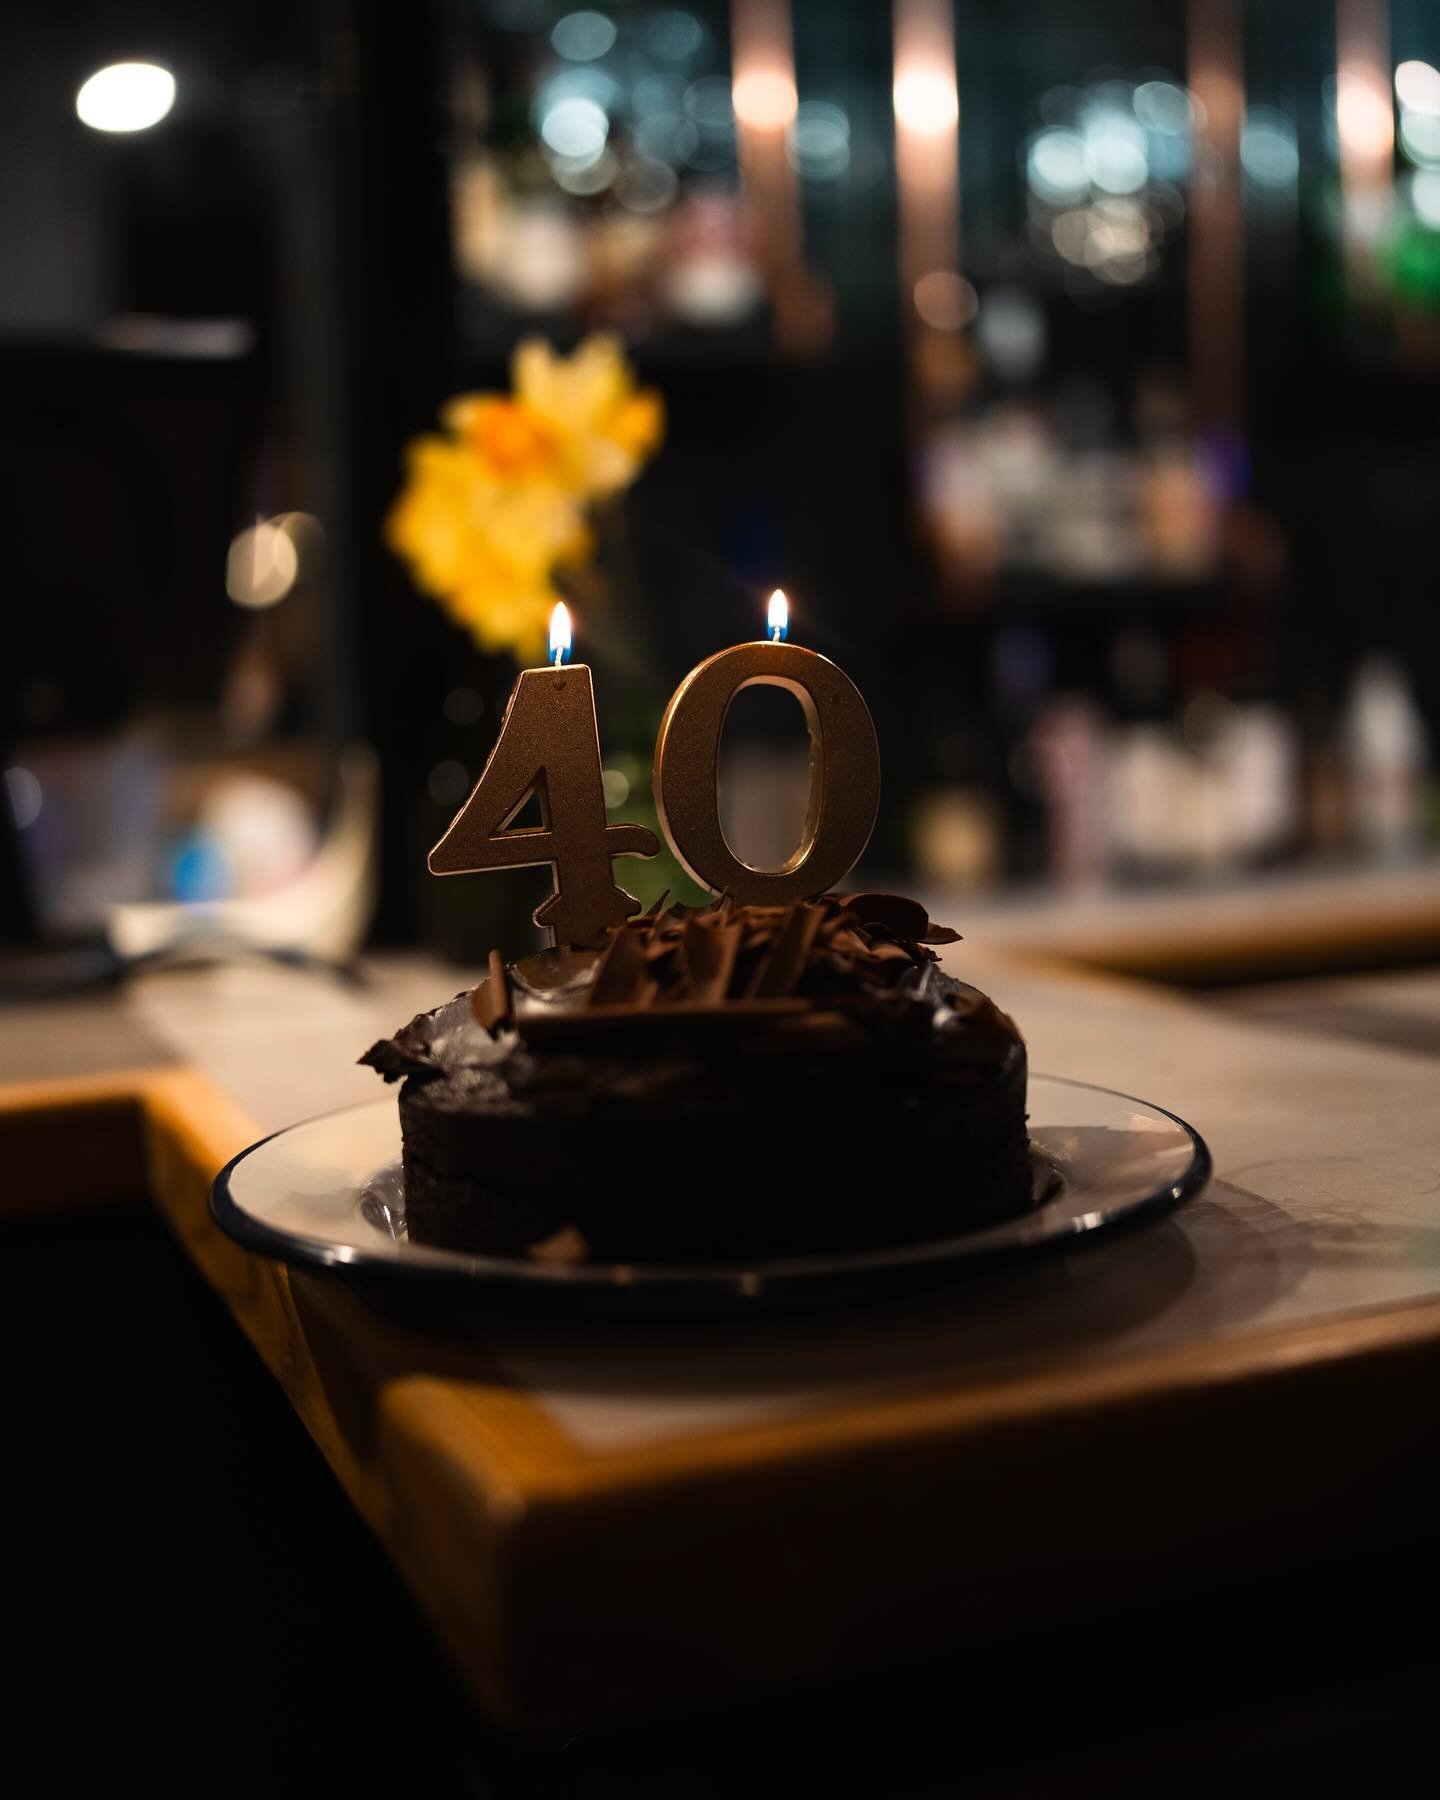 -𝘽𝙄𝙂 𝙂𝙍𝙊𝙐𝙋𝙎-

Looking for the perfect venue to host your big group celebration? Look no further than 2 Bridges!
At 2 Bridges, we welcome big groups with open arms, whether it&rsquo;s a birthday bash, a special occasion, or a get-together wit